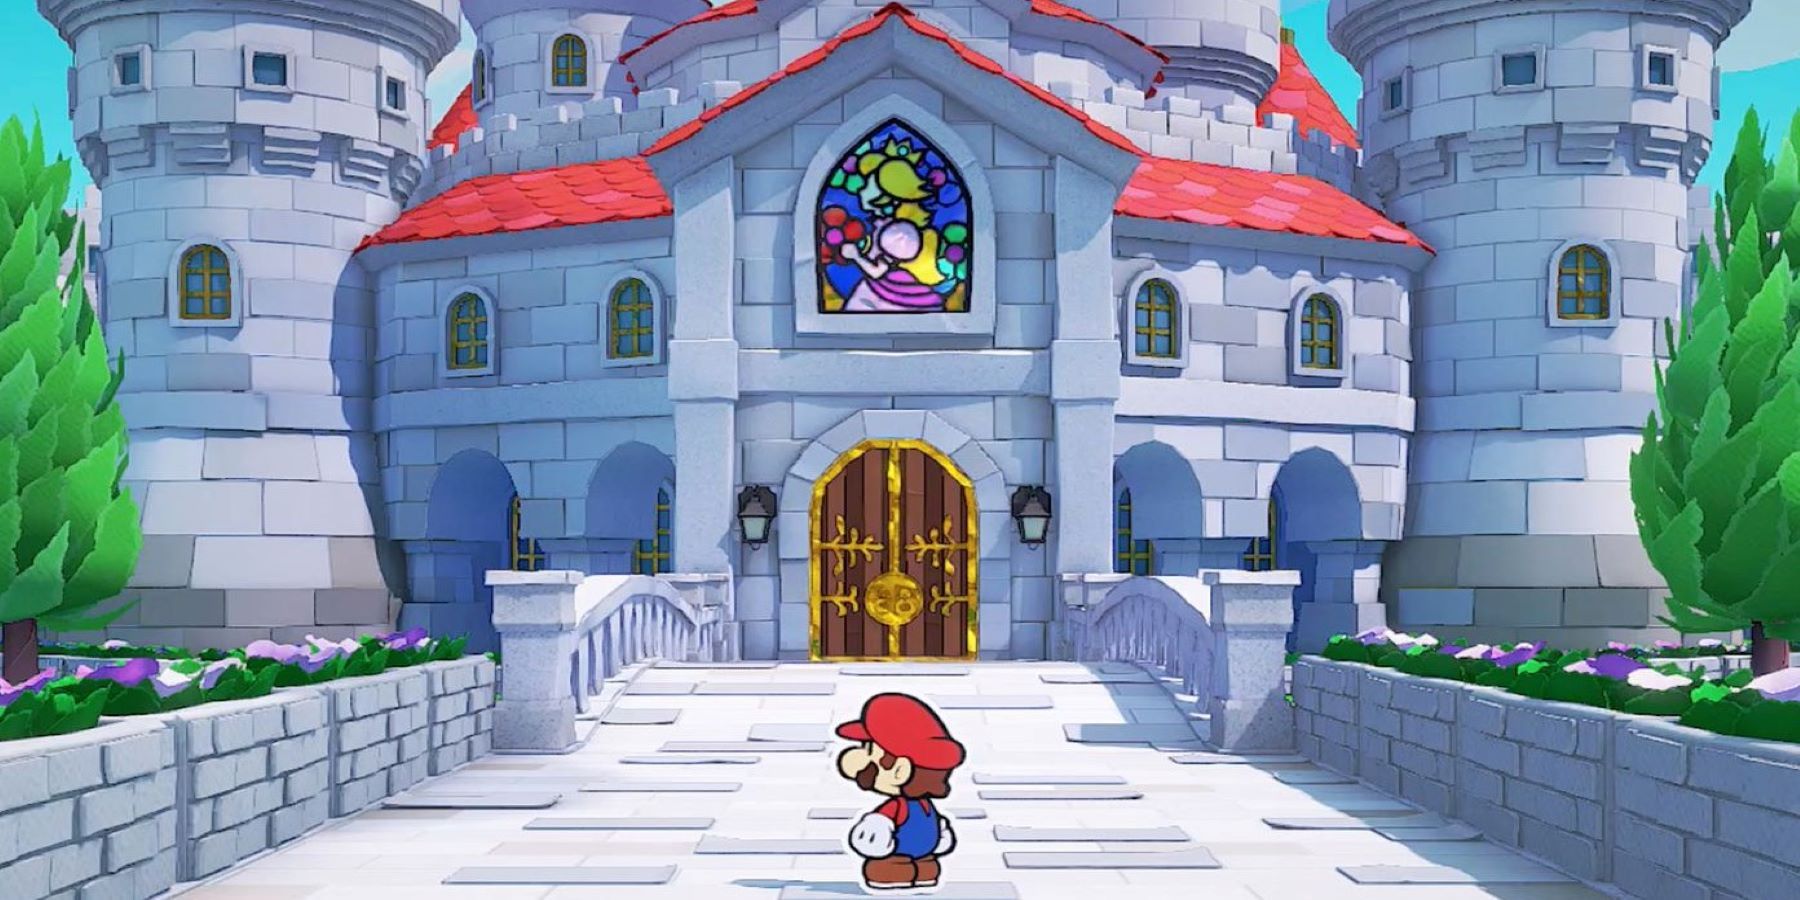 Mario standing outside Peach's Castle in Paper Mario: The Origami King